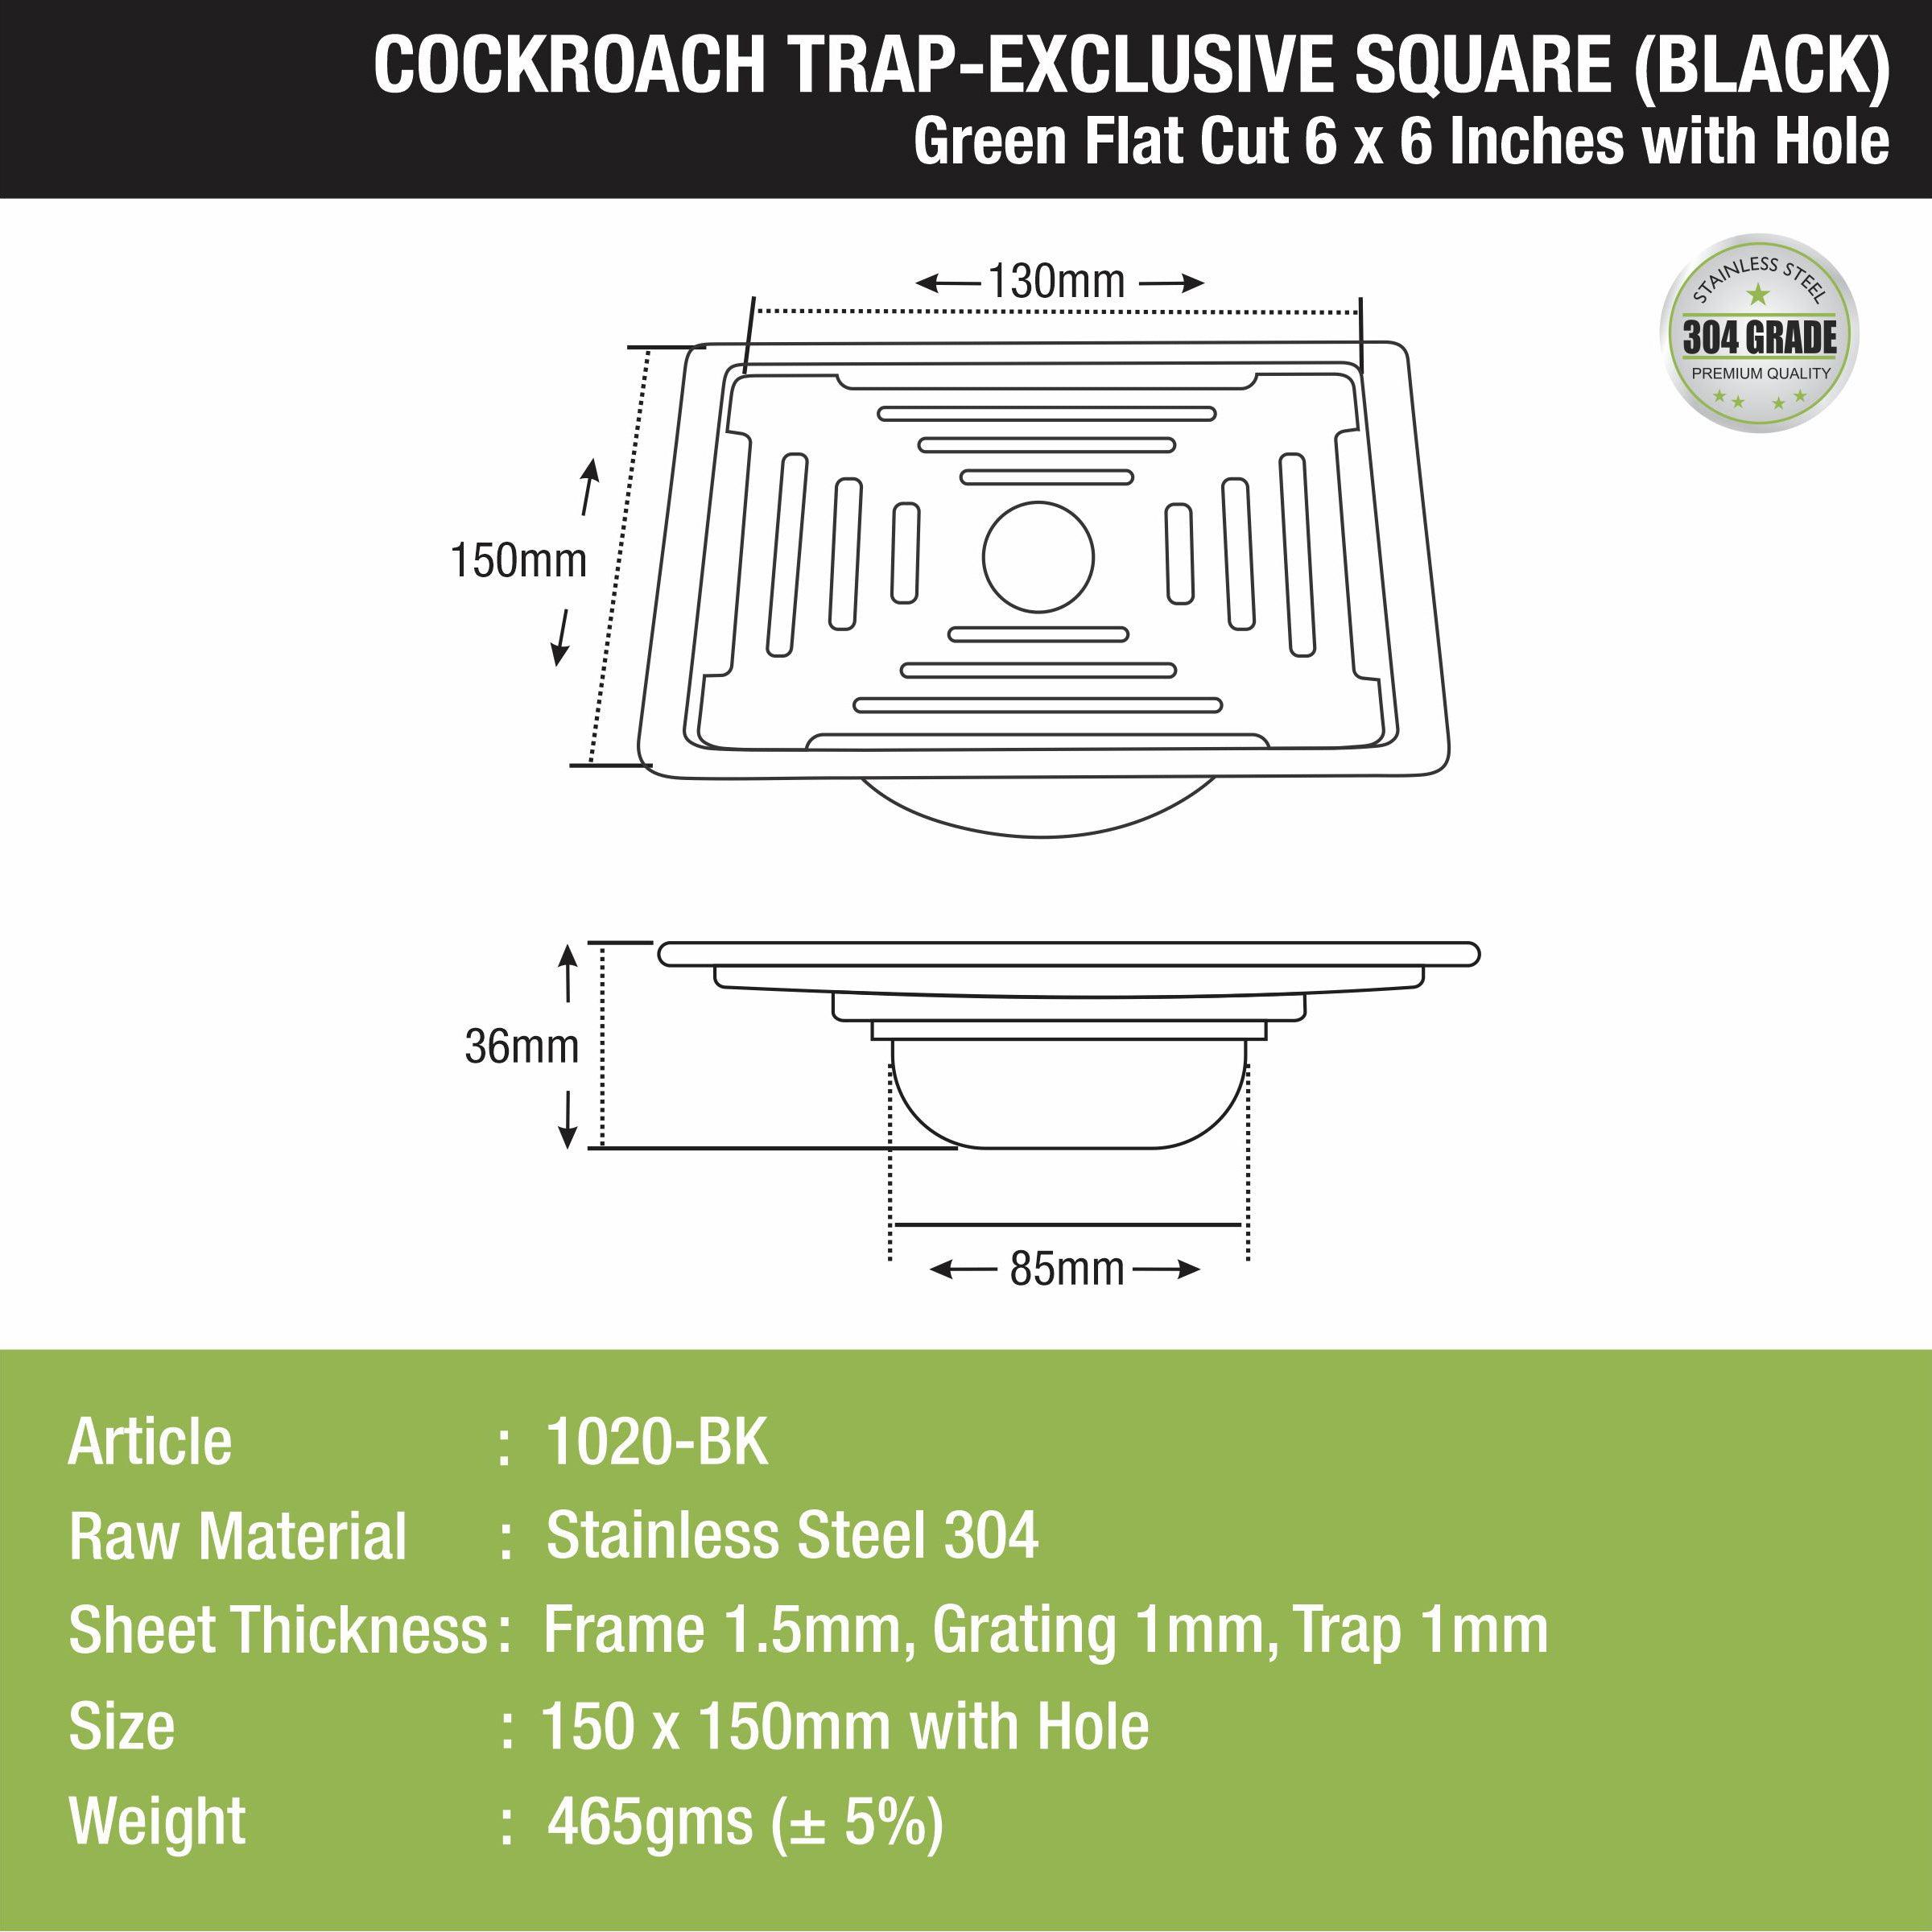 Green Exclusive Square Flat Cut Floor Drain in Black PVD Coating (6 x 6 Inches) with Hole & Cockroach Trap size and measurement 